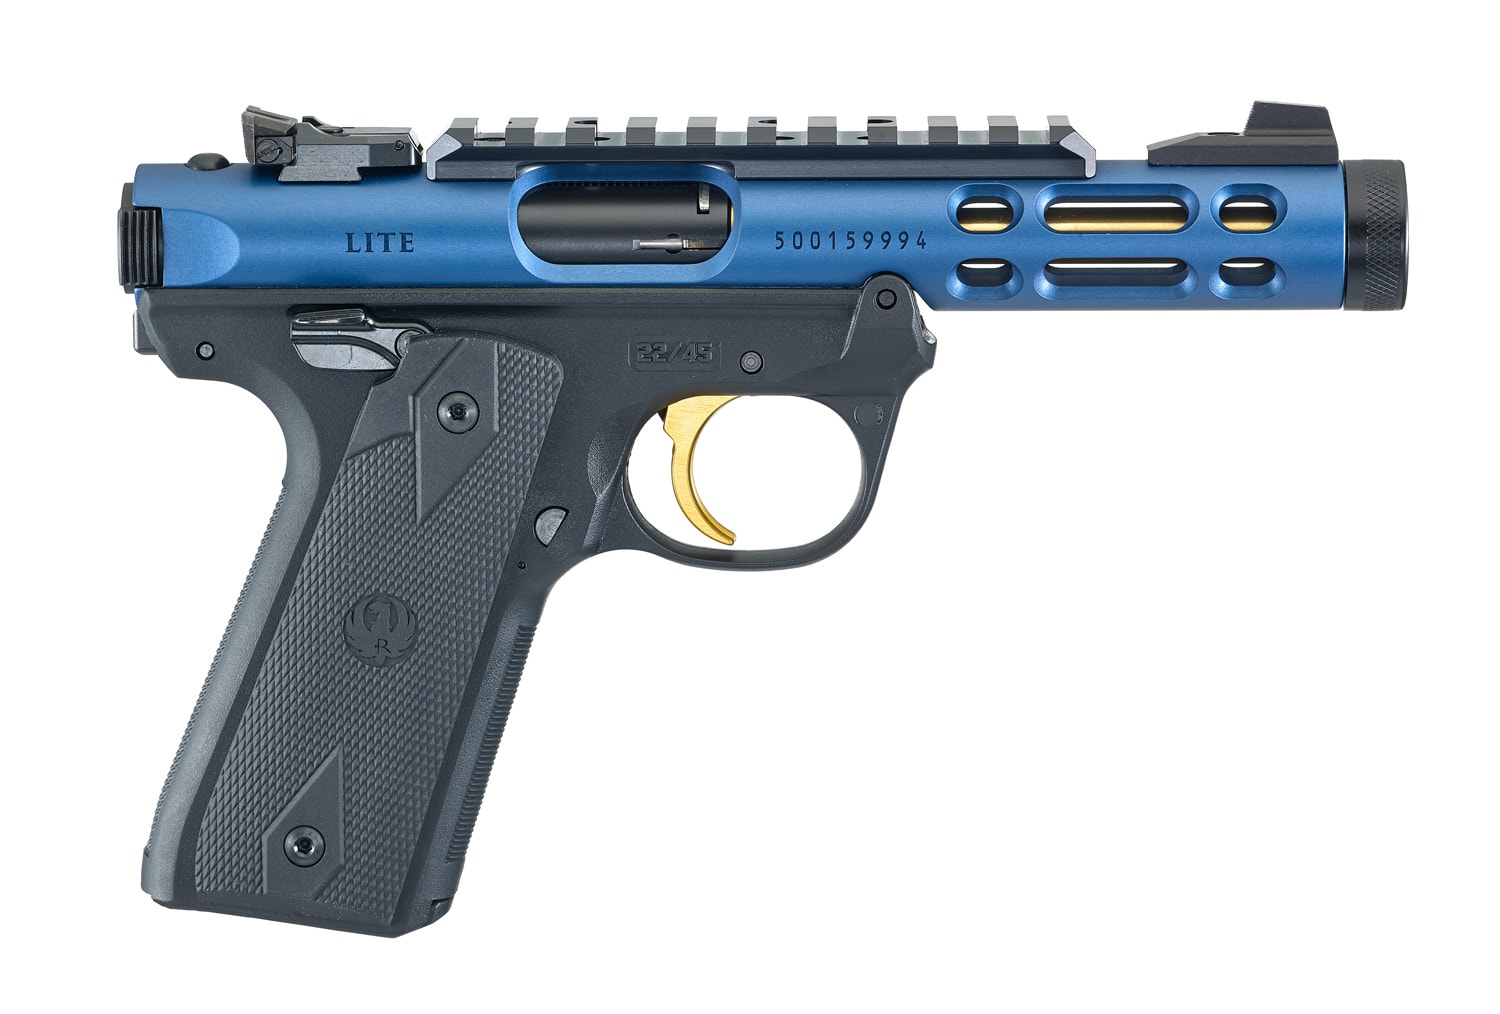 Ruger 22/45 .22 LR Autopistol. Image Credit: Creative Commons.